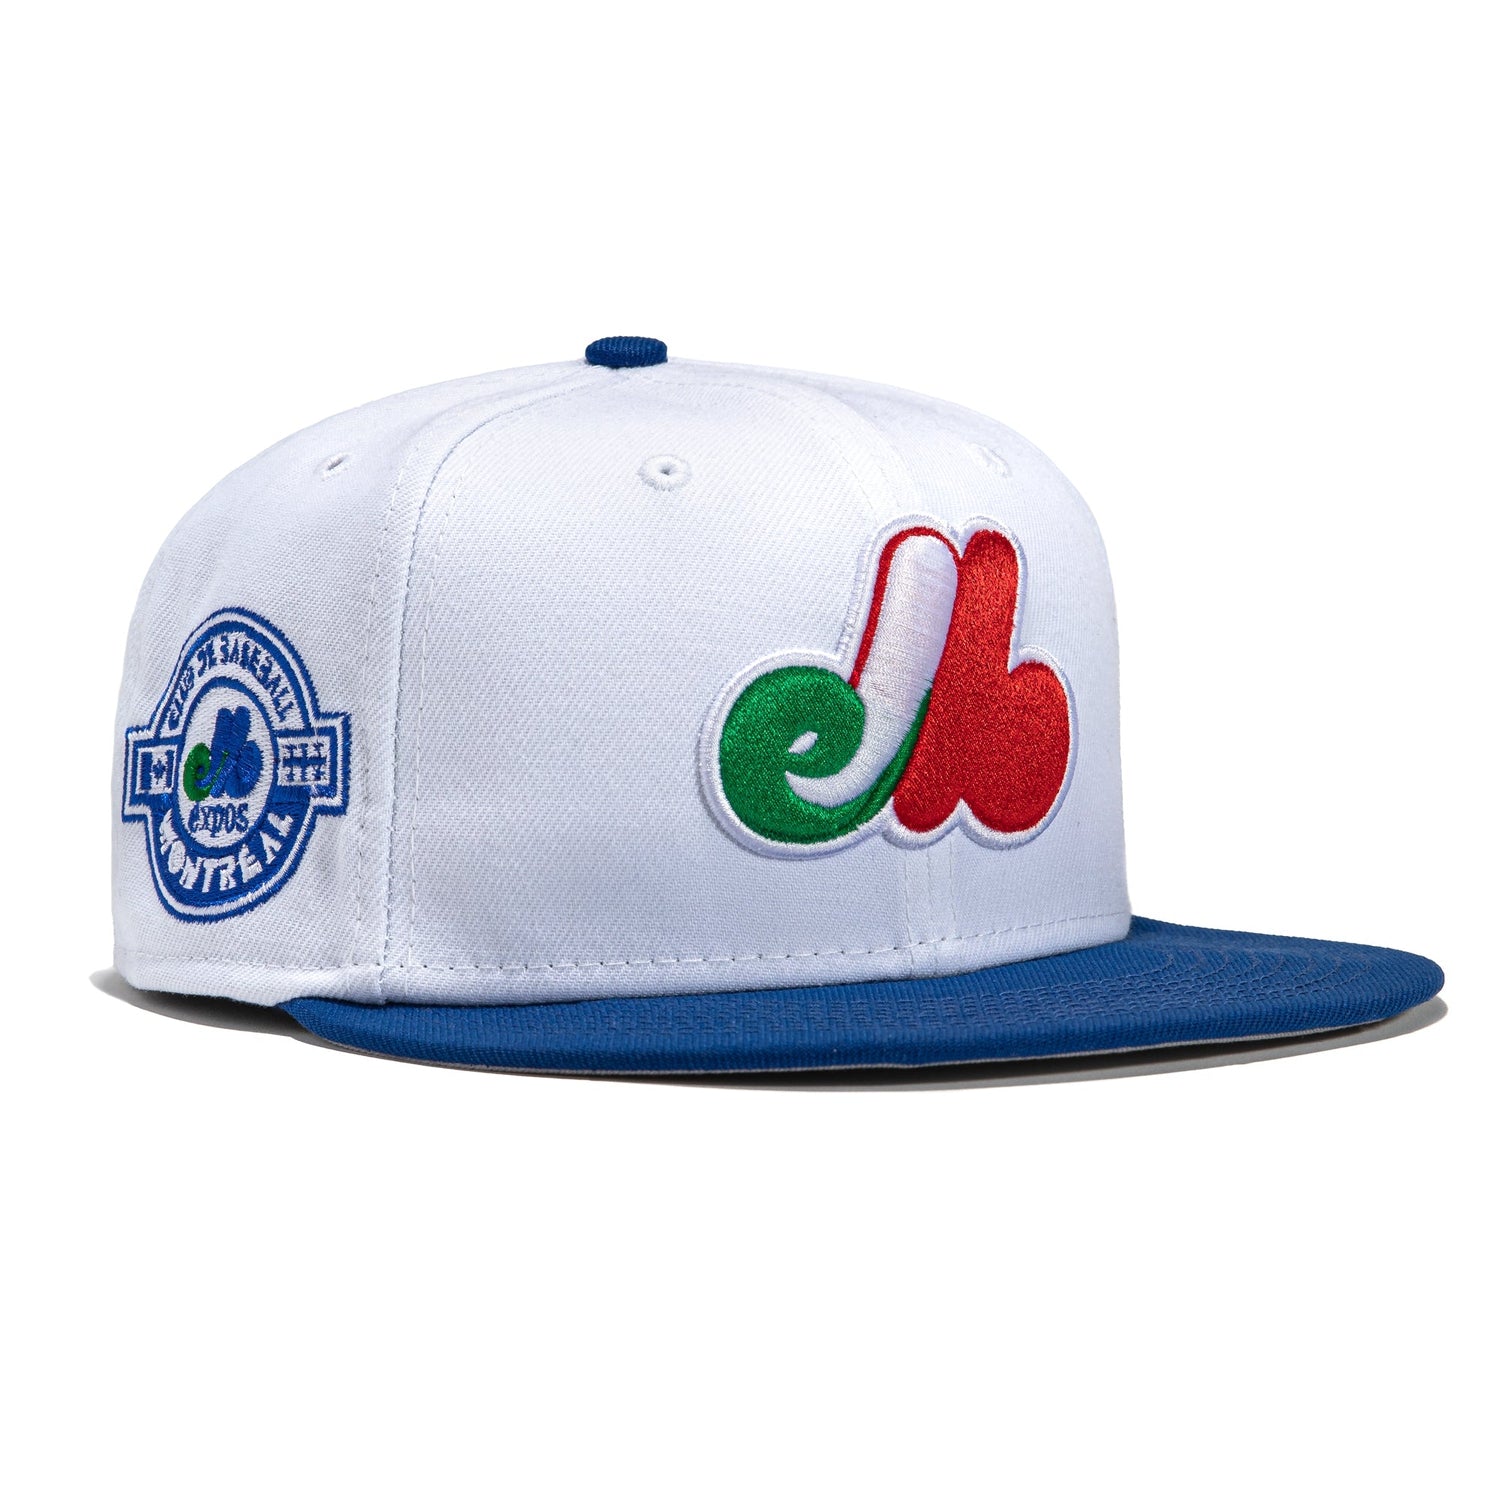 New Era 59FIFTY Boxing Legends Montreal Expos Club Patch Hat - White, Royal White/Royal / 7 1/2